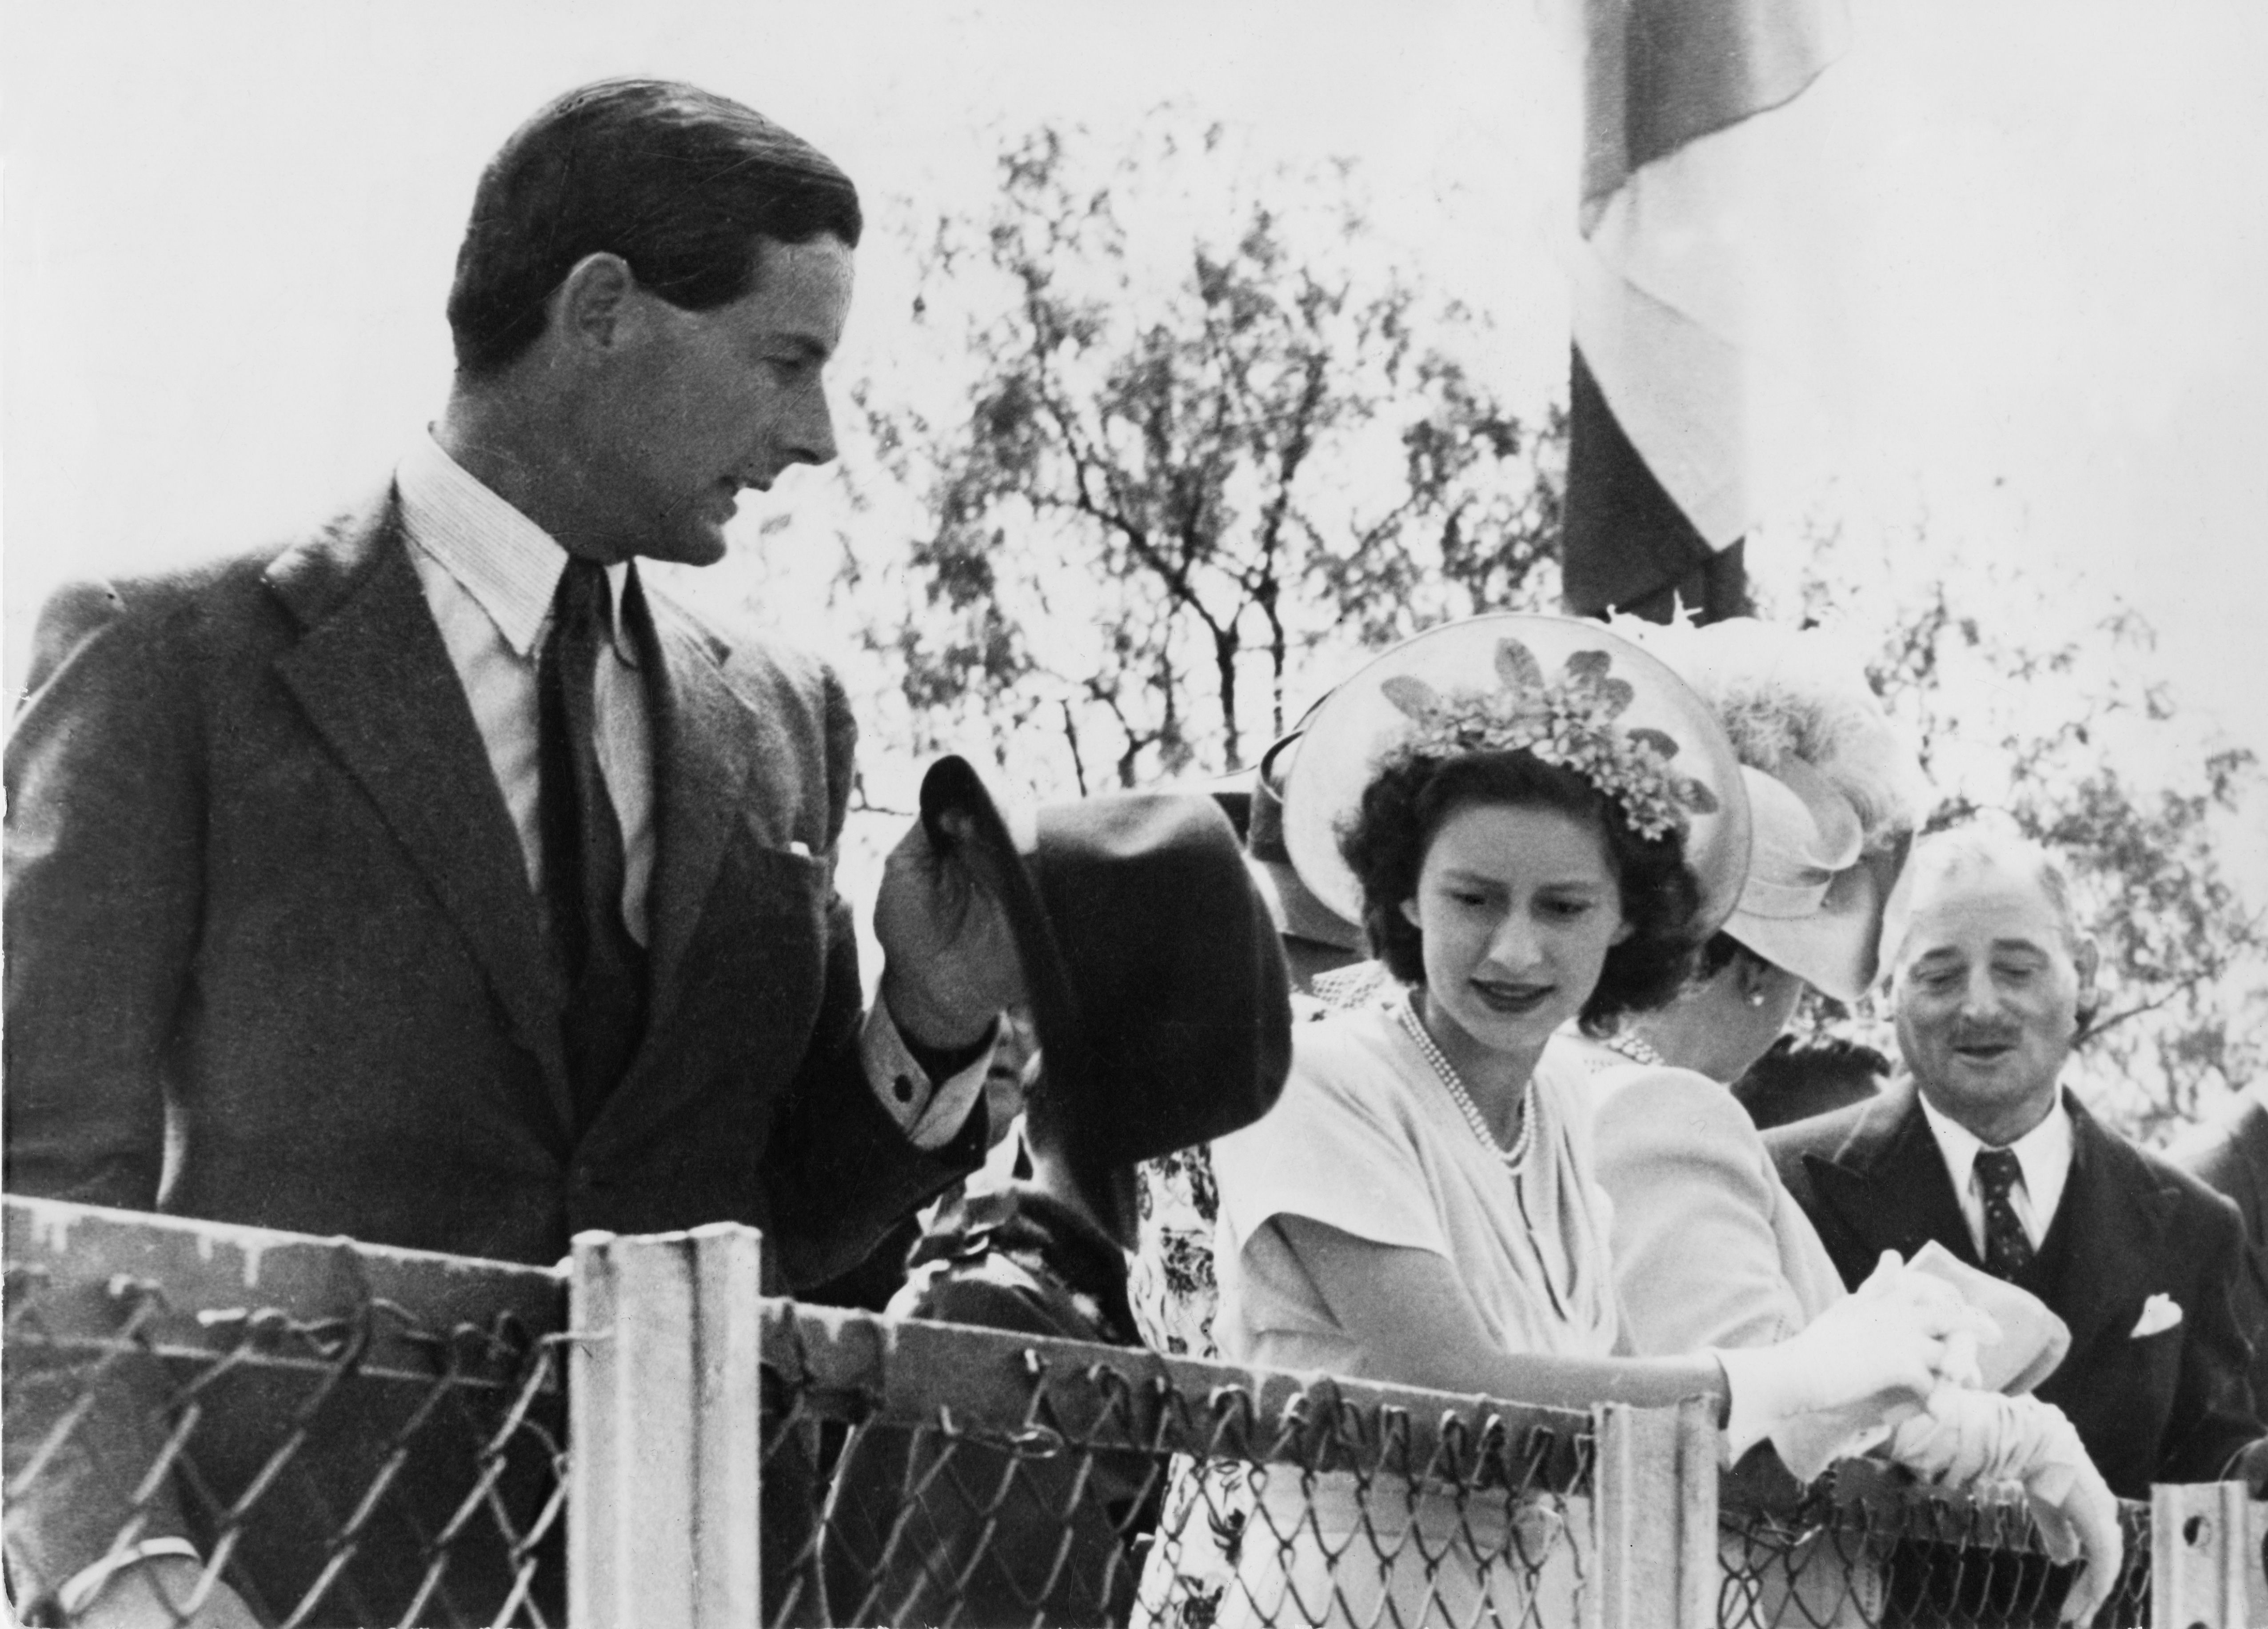 Princess Margaret Peter Townsend in South Africa during the royal tour, 1947. | Source: Getty Images